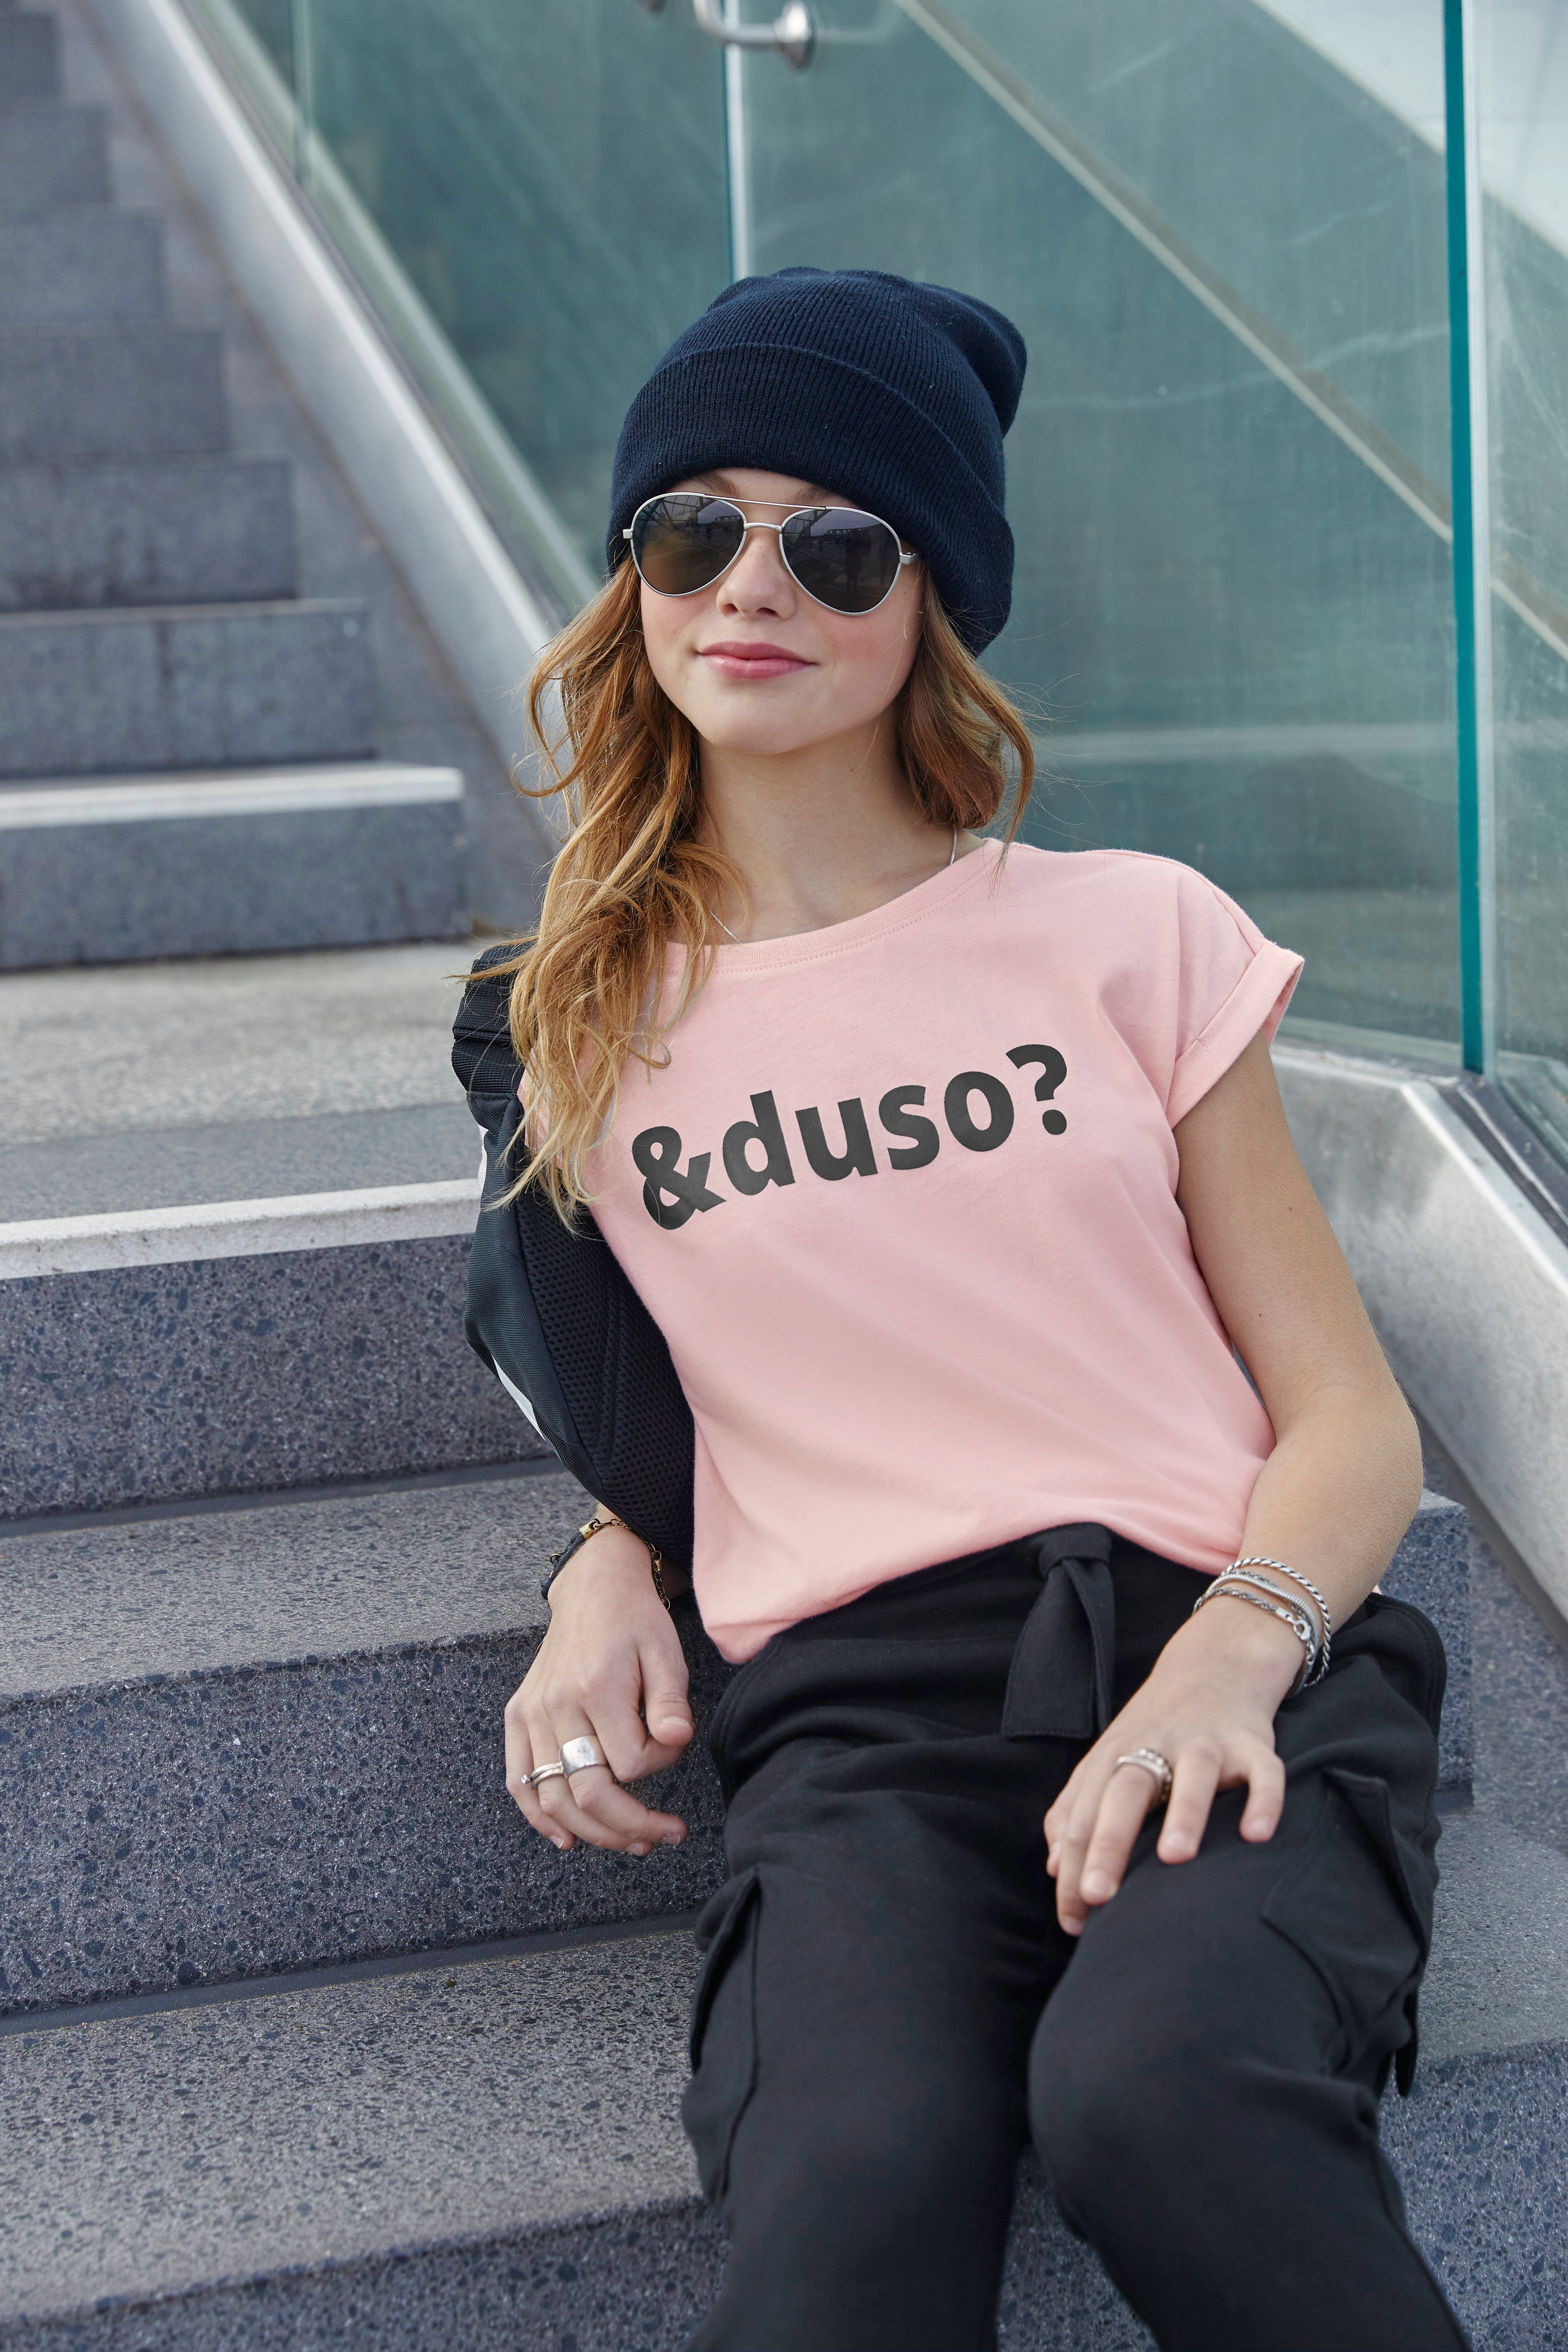 KIDSWORLD T-Shirt &duso? in bequemer Passform | T-Shirts